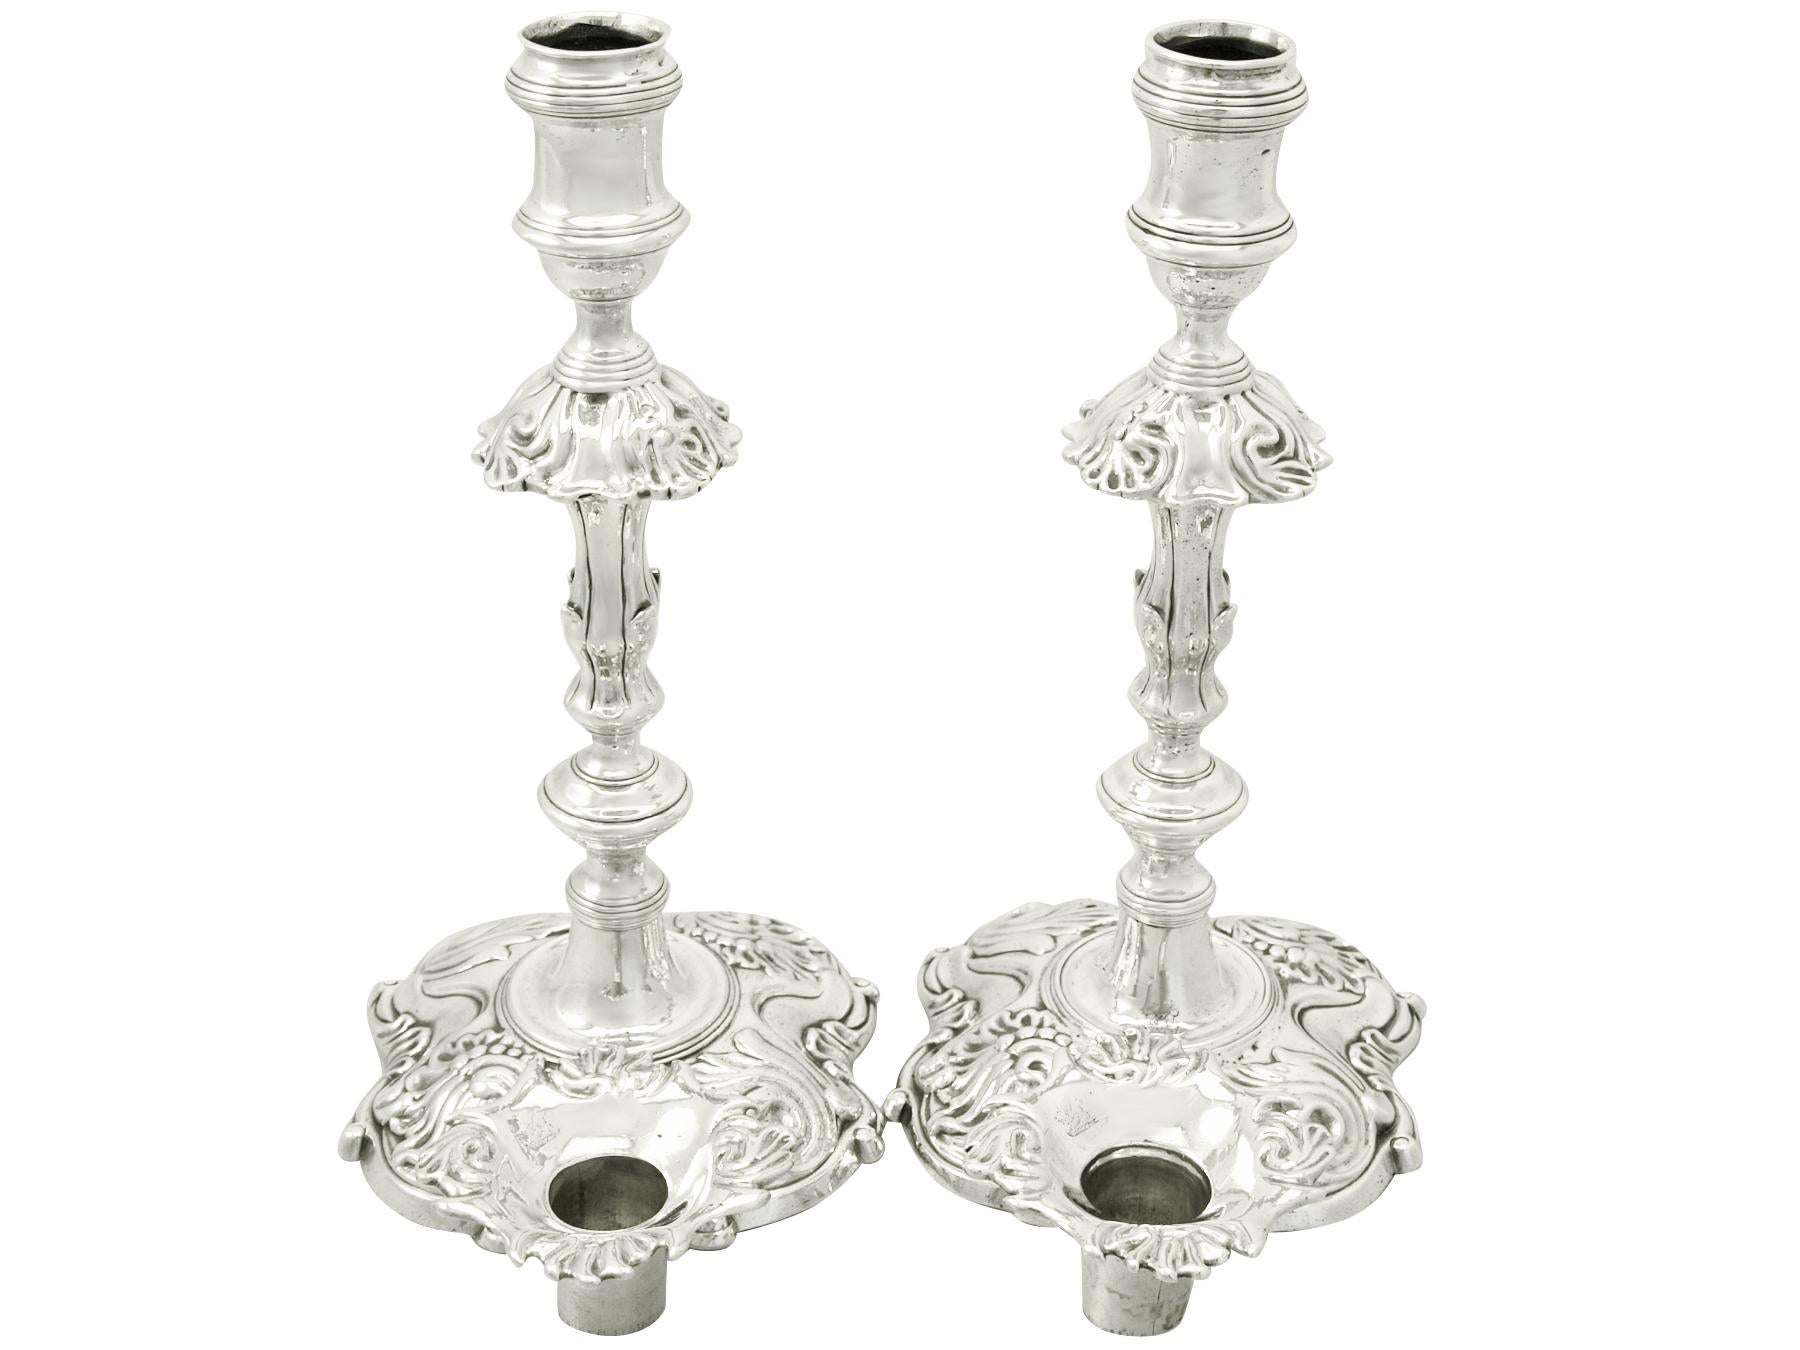 English Antique 1740s Sterling Silver Candlesticks